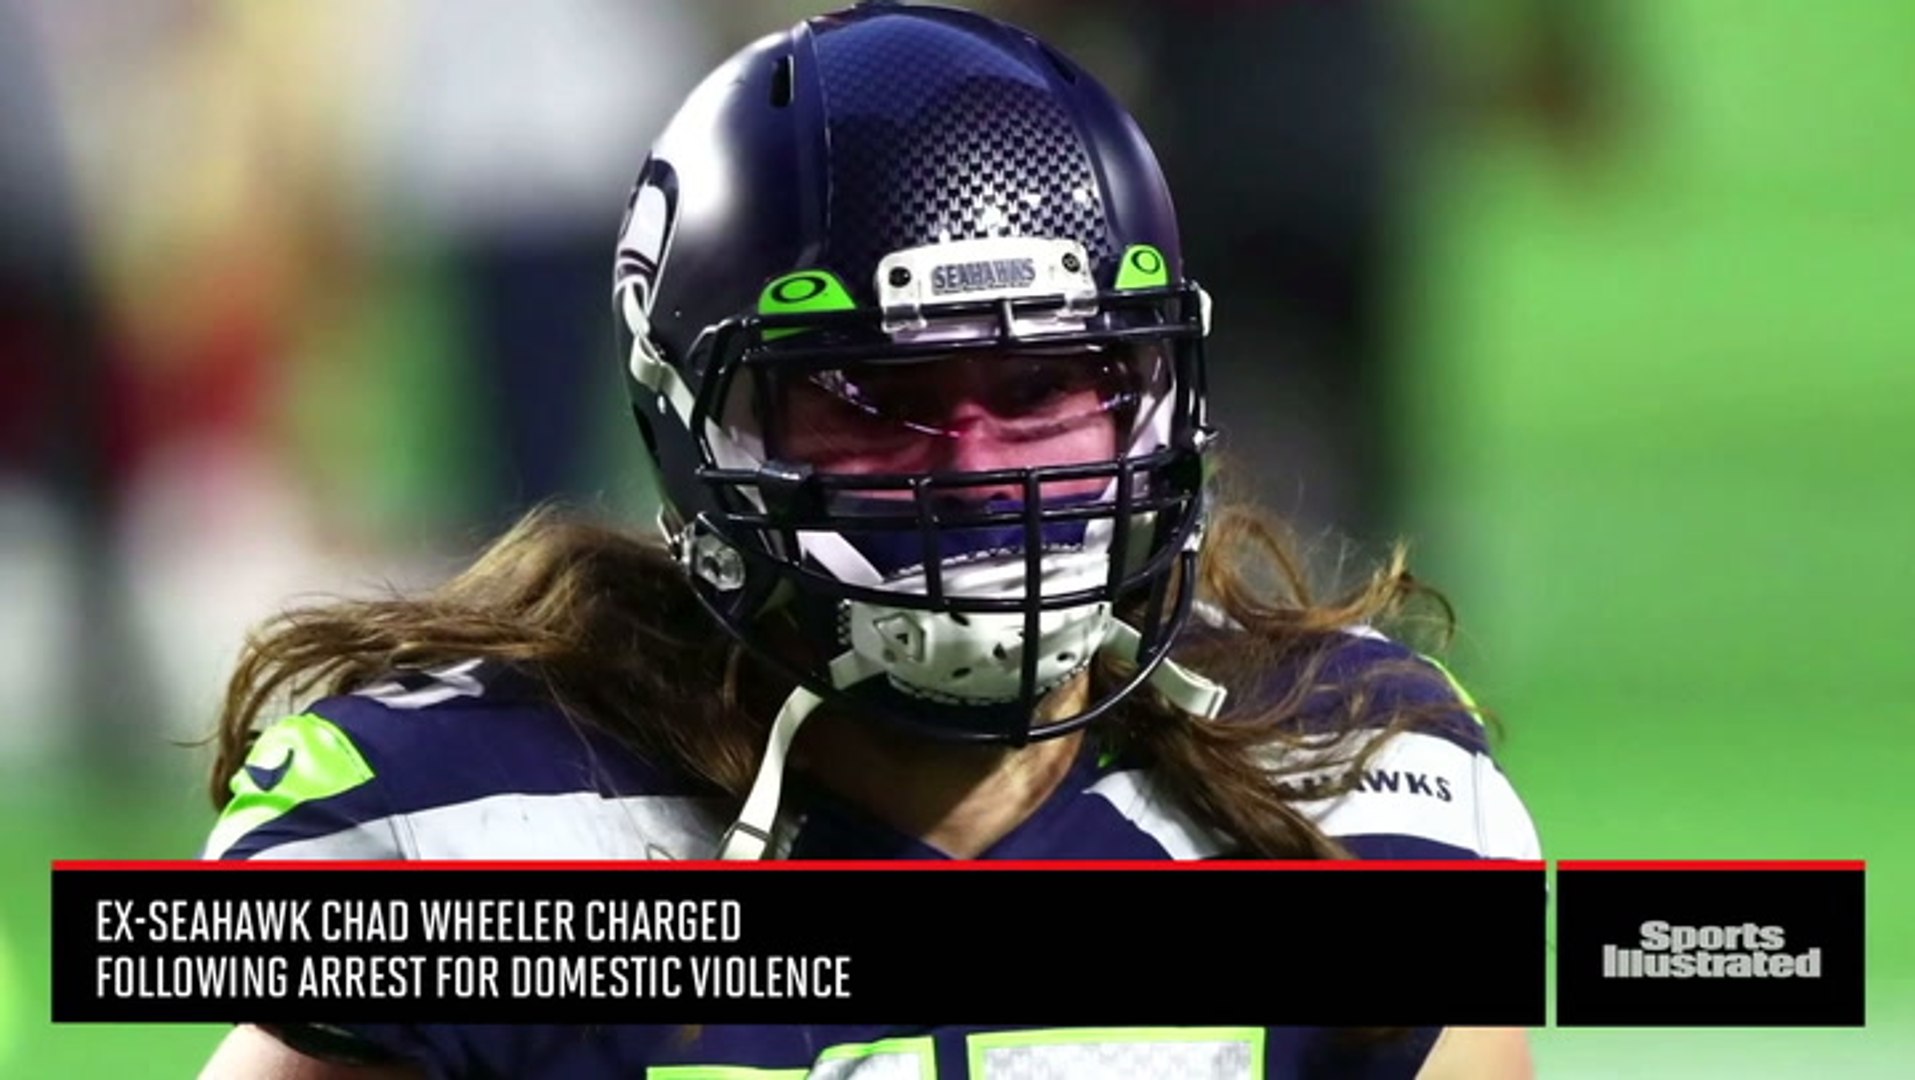 Ex-Seahawk Chad Wheeler Charged Following Arrest for Domestic Violence